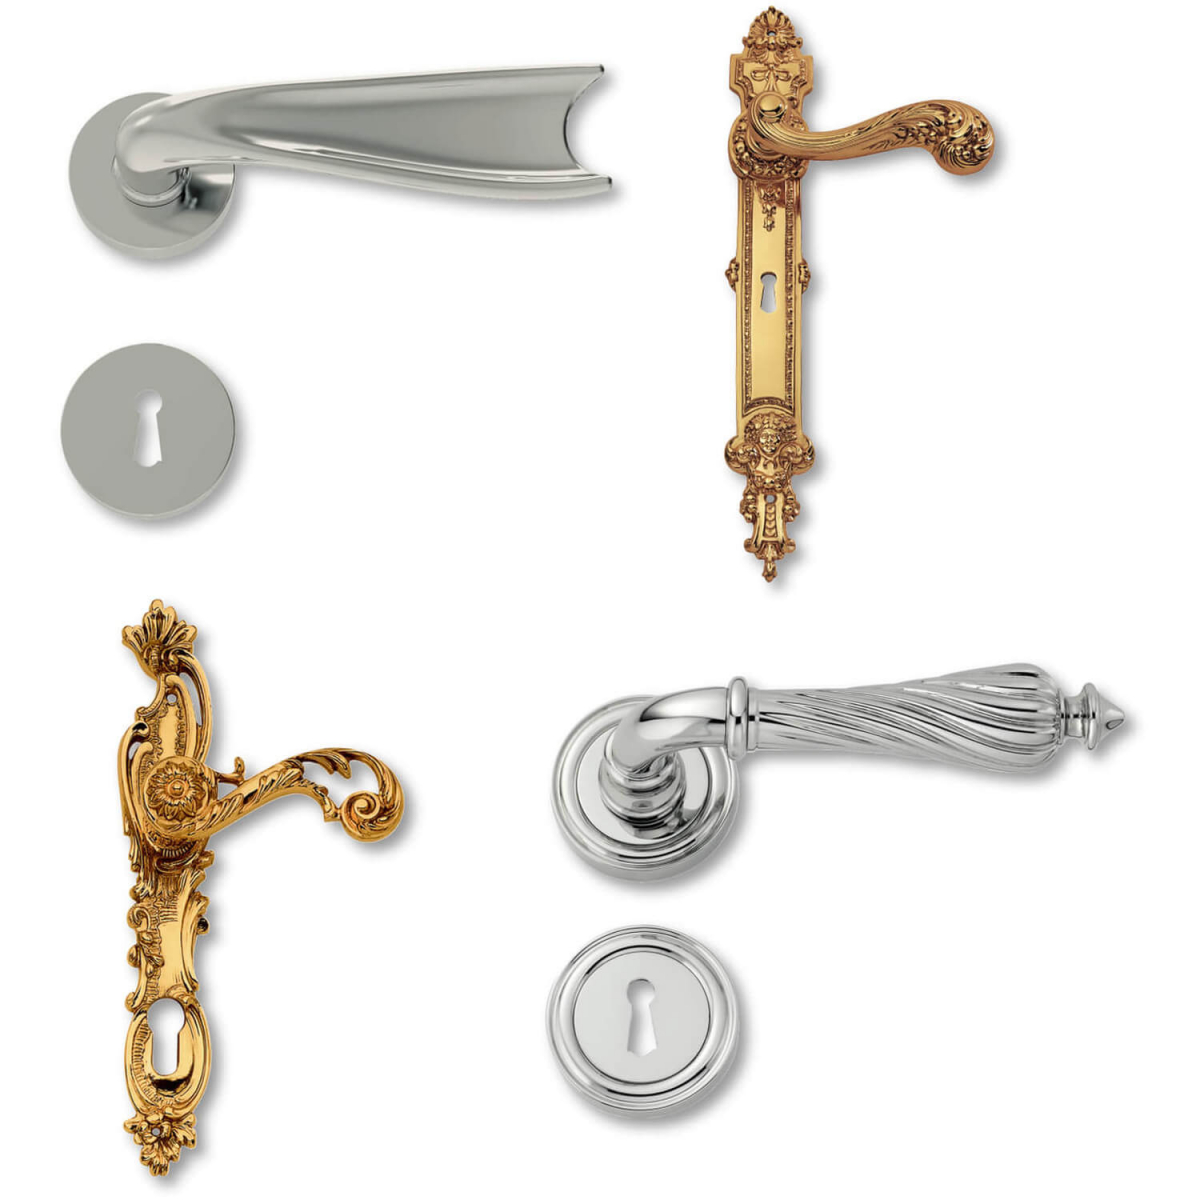 Details about   Howdens Bertelli Chrissi Shaped Door Handles Polished Brass Italian Quality 